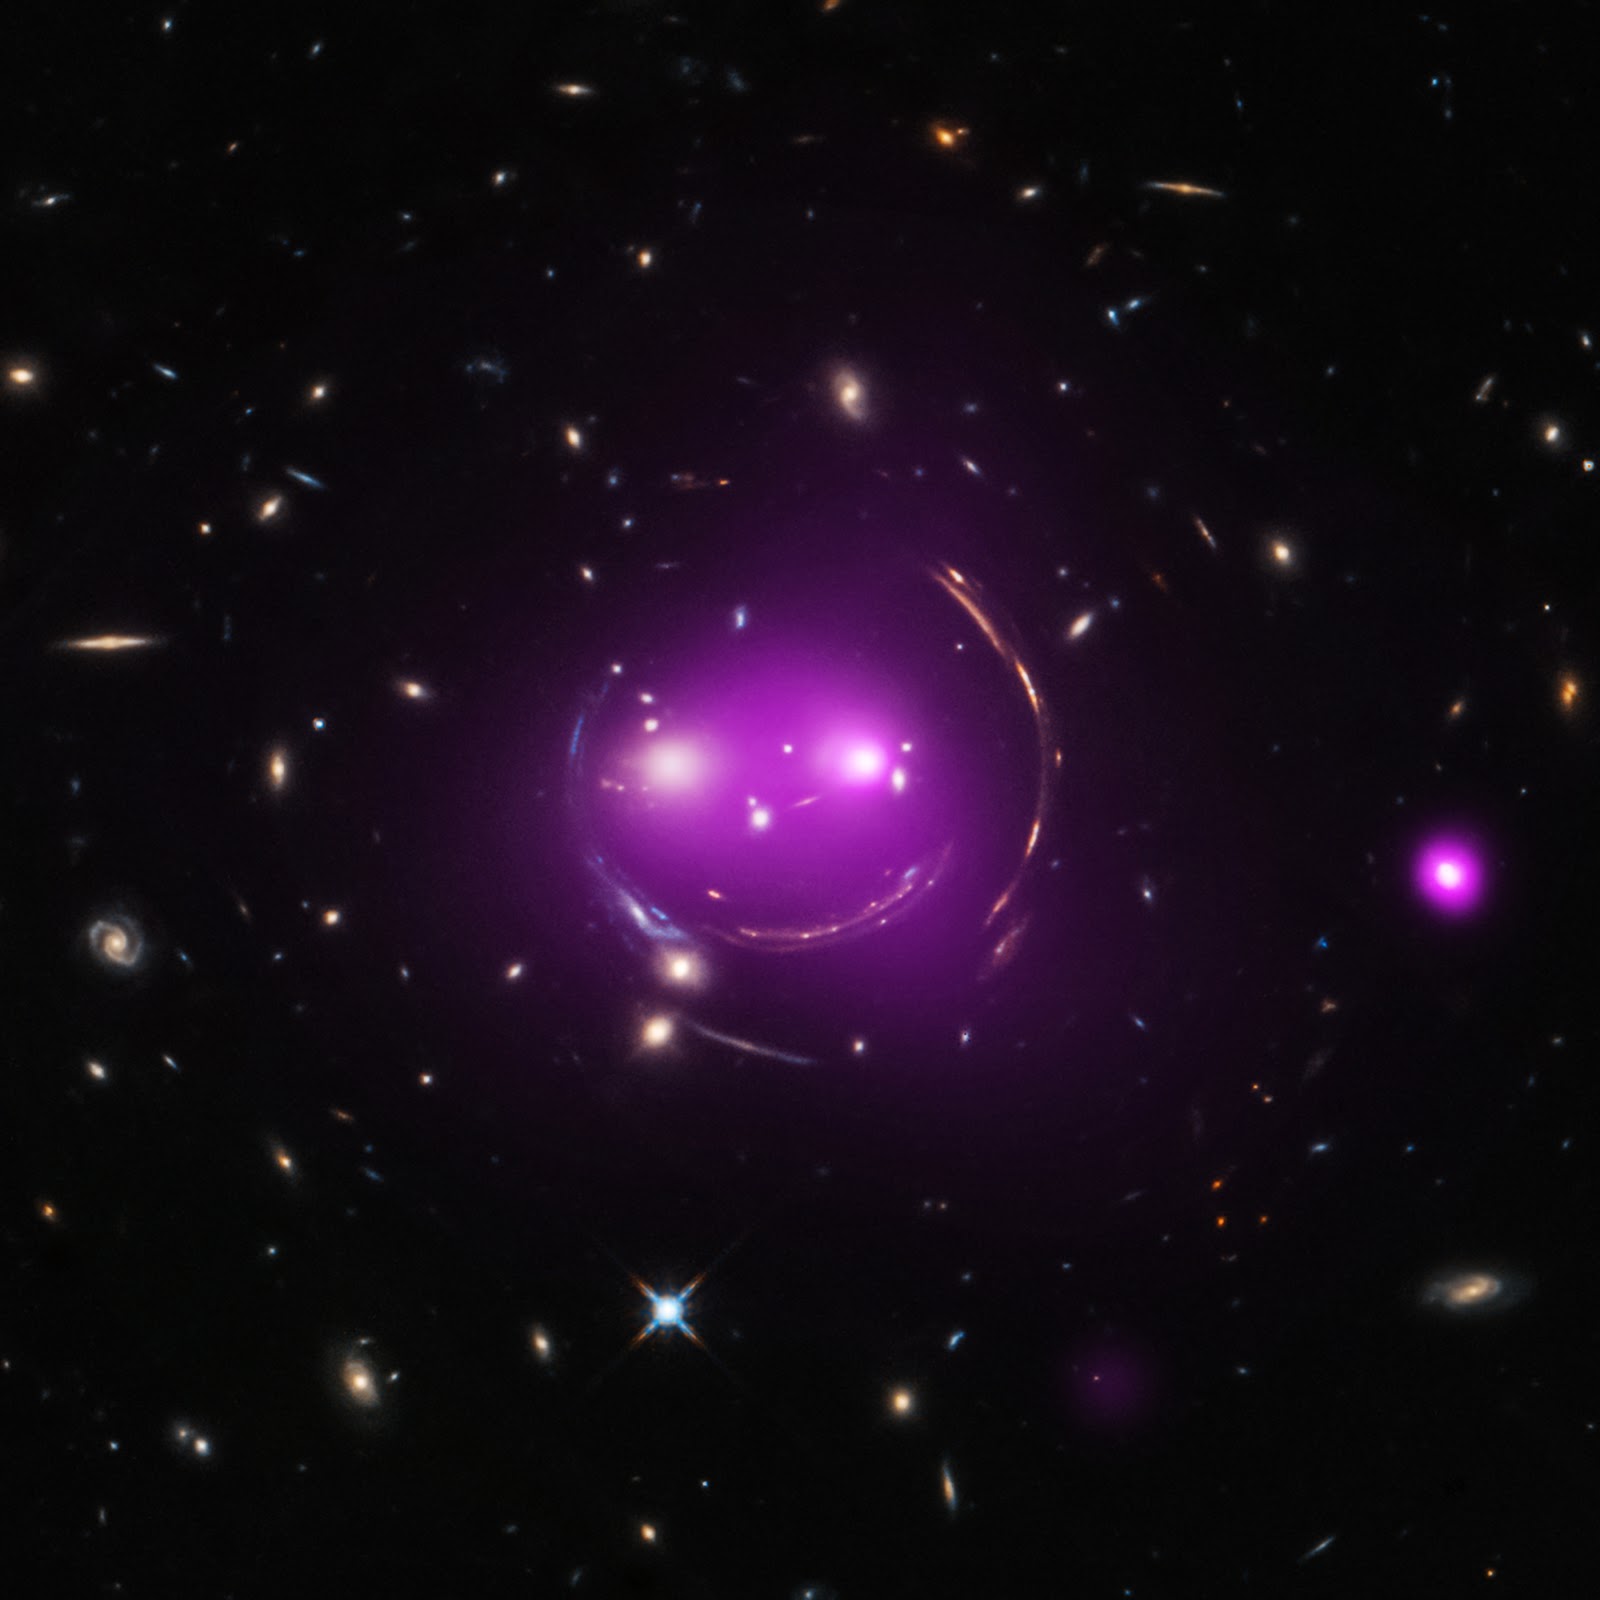 Cheshire Cat The Sdss J103842 Galaxy Group Earth